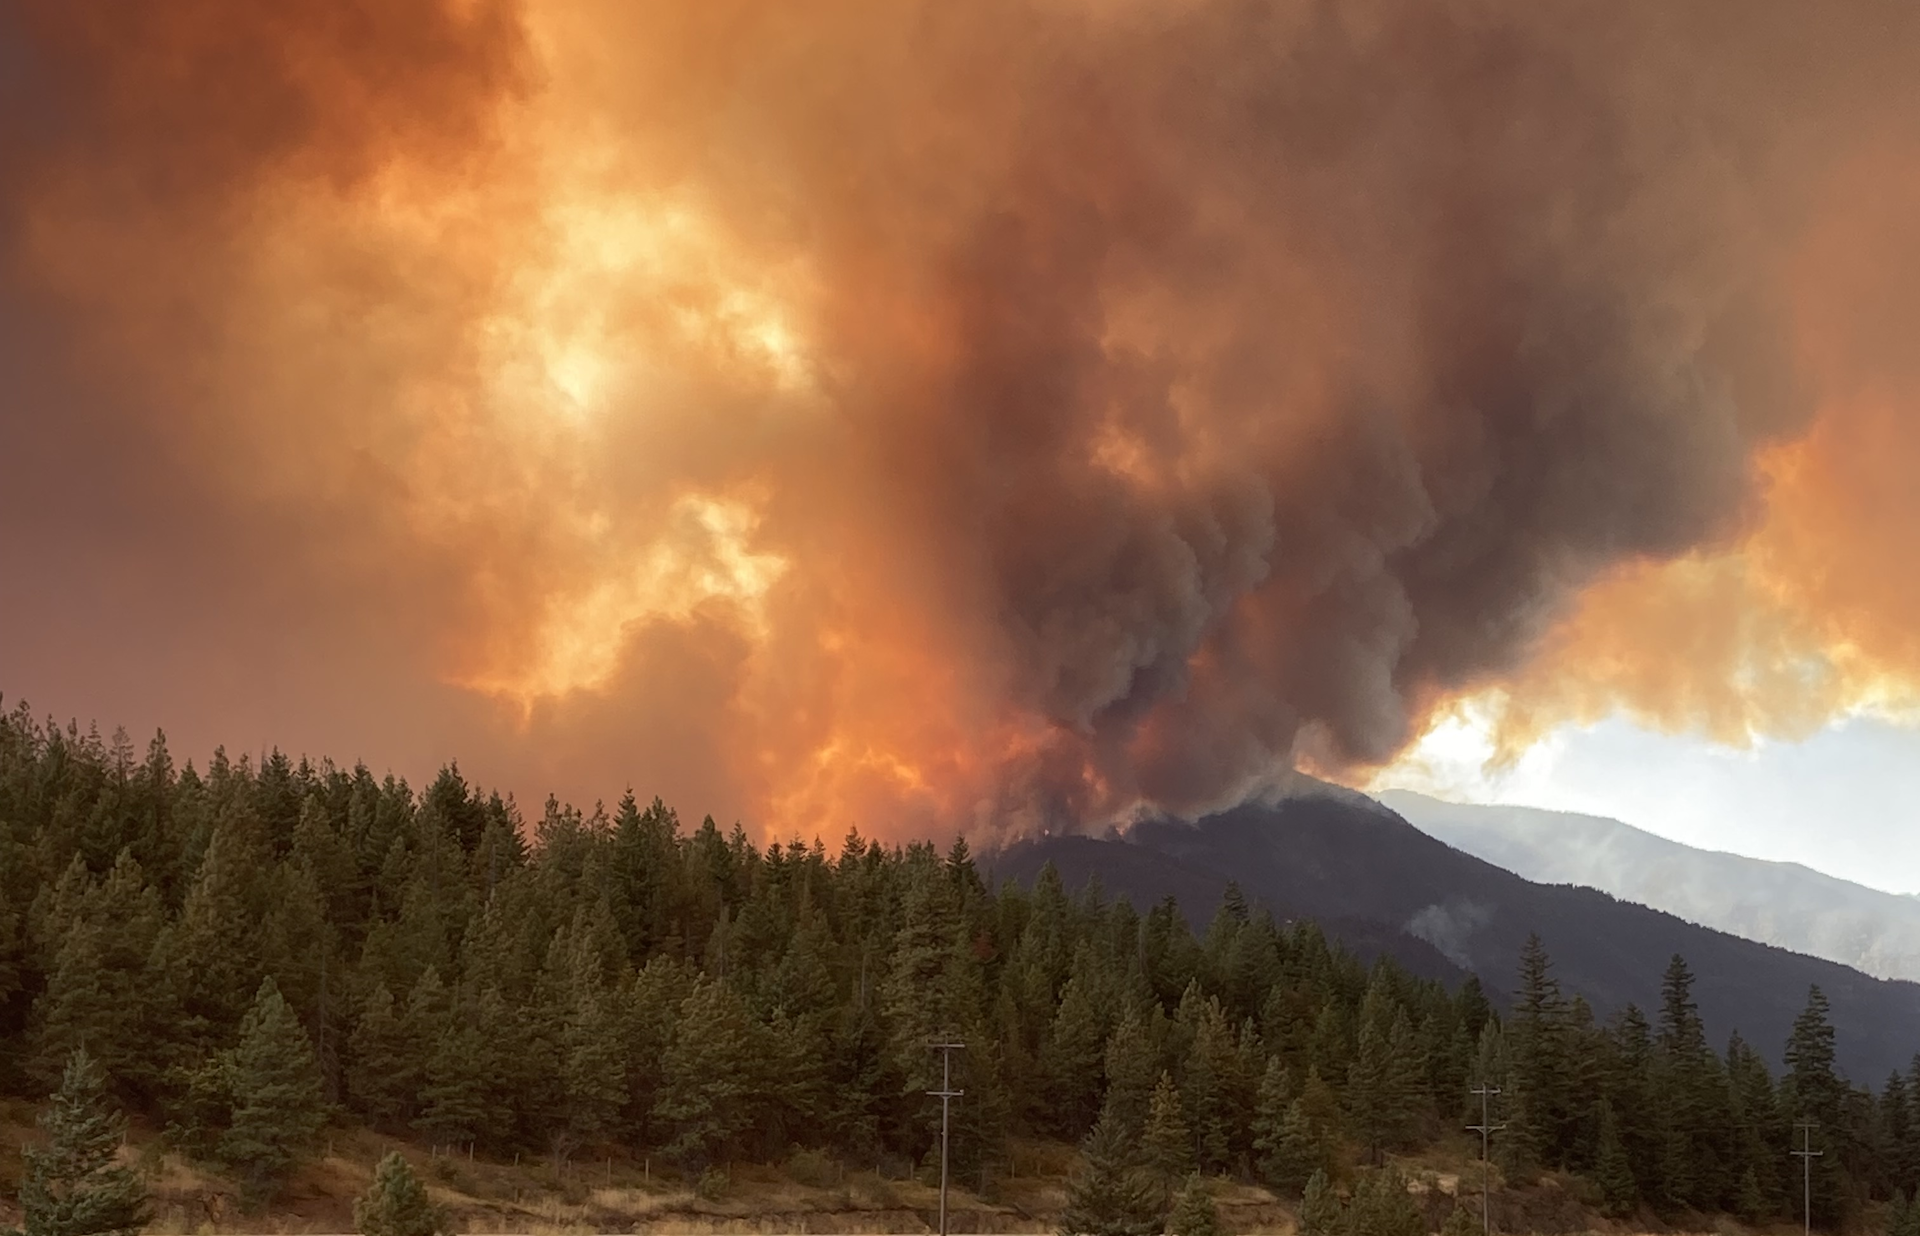 B.C. ends wildfire-related state of emergency, but fire season is not over